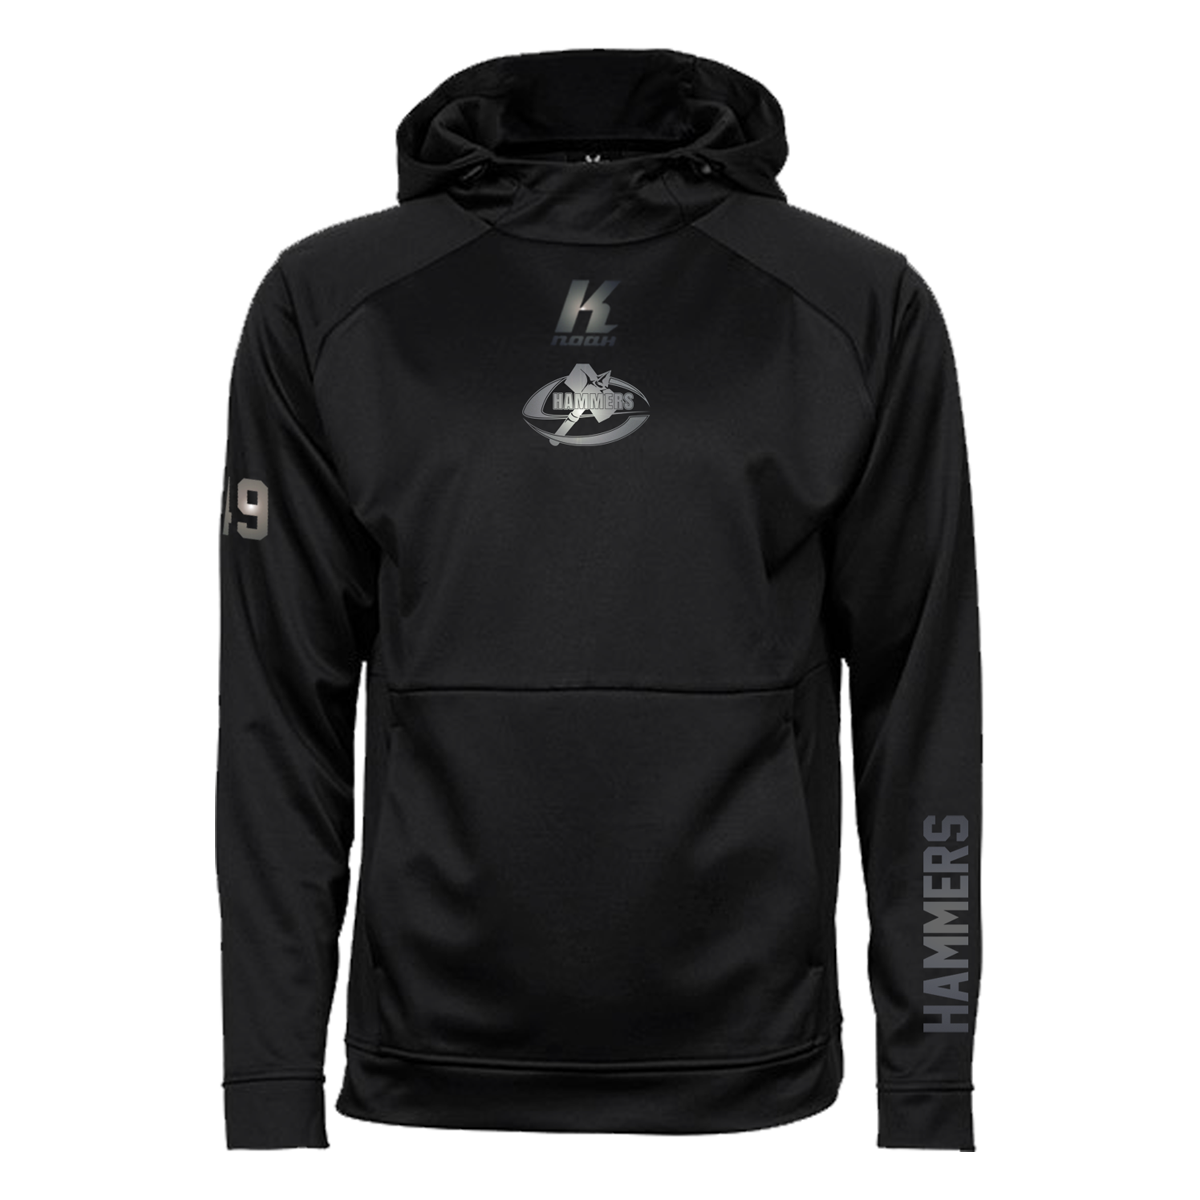 S-Hammers "Blackline" Performance Hoodie JH006 with Playernumber or Initials